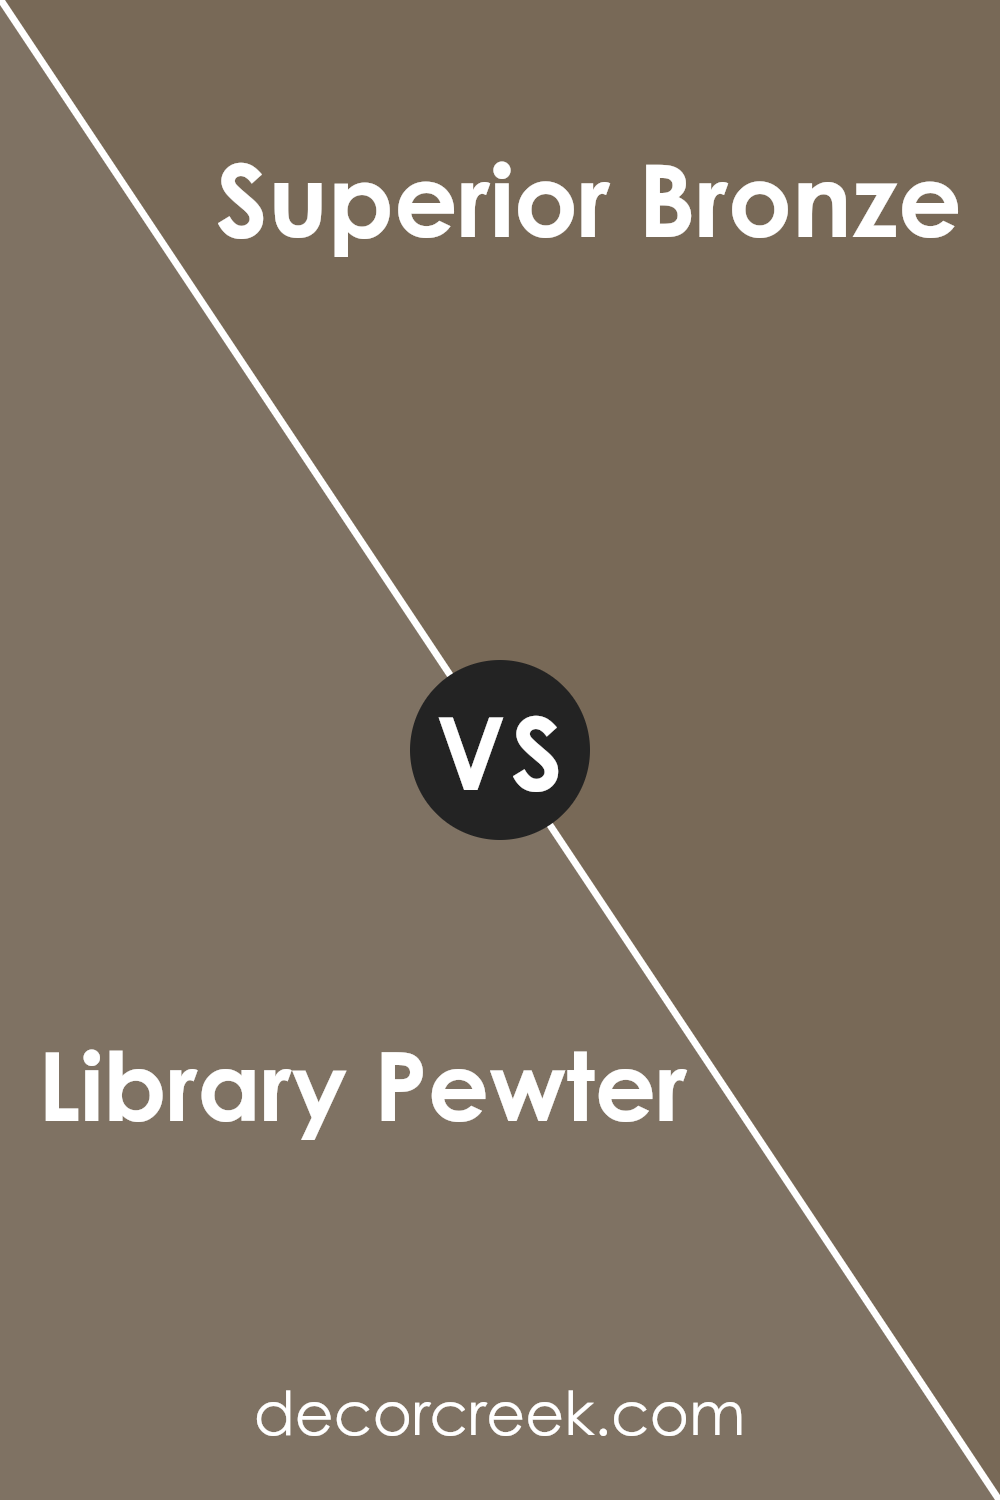 library_pewter_sw_0038_vs_superior_bronze_sw_6152